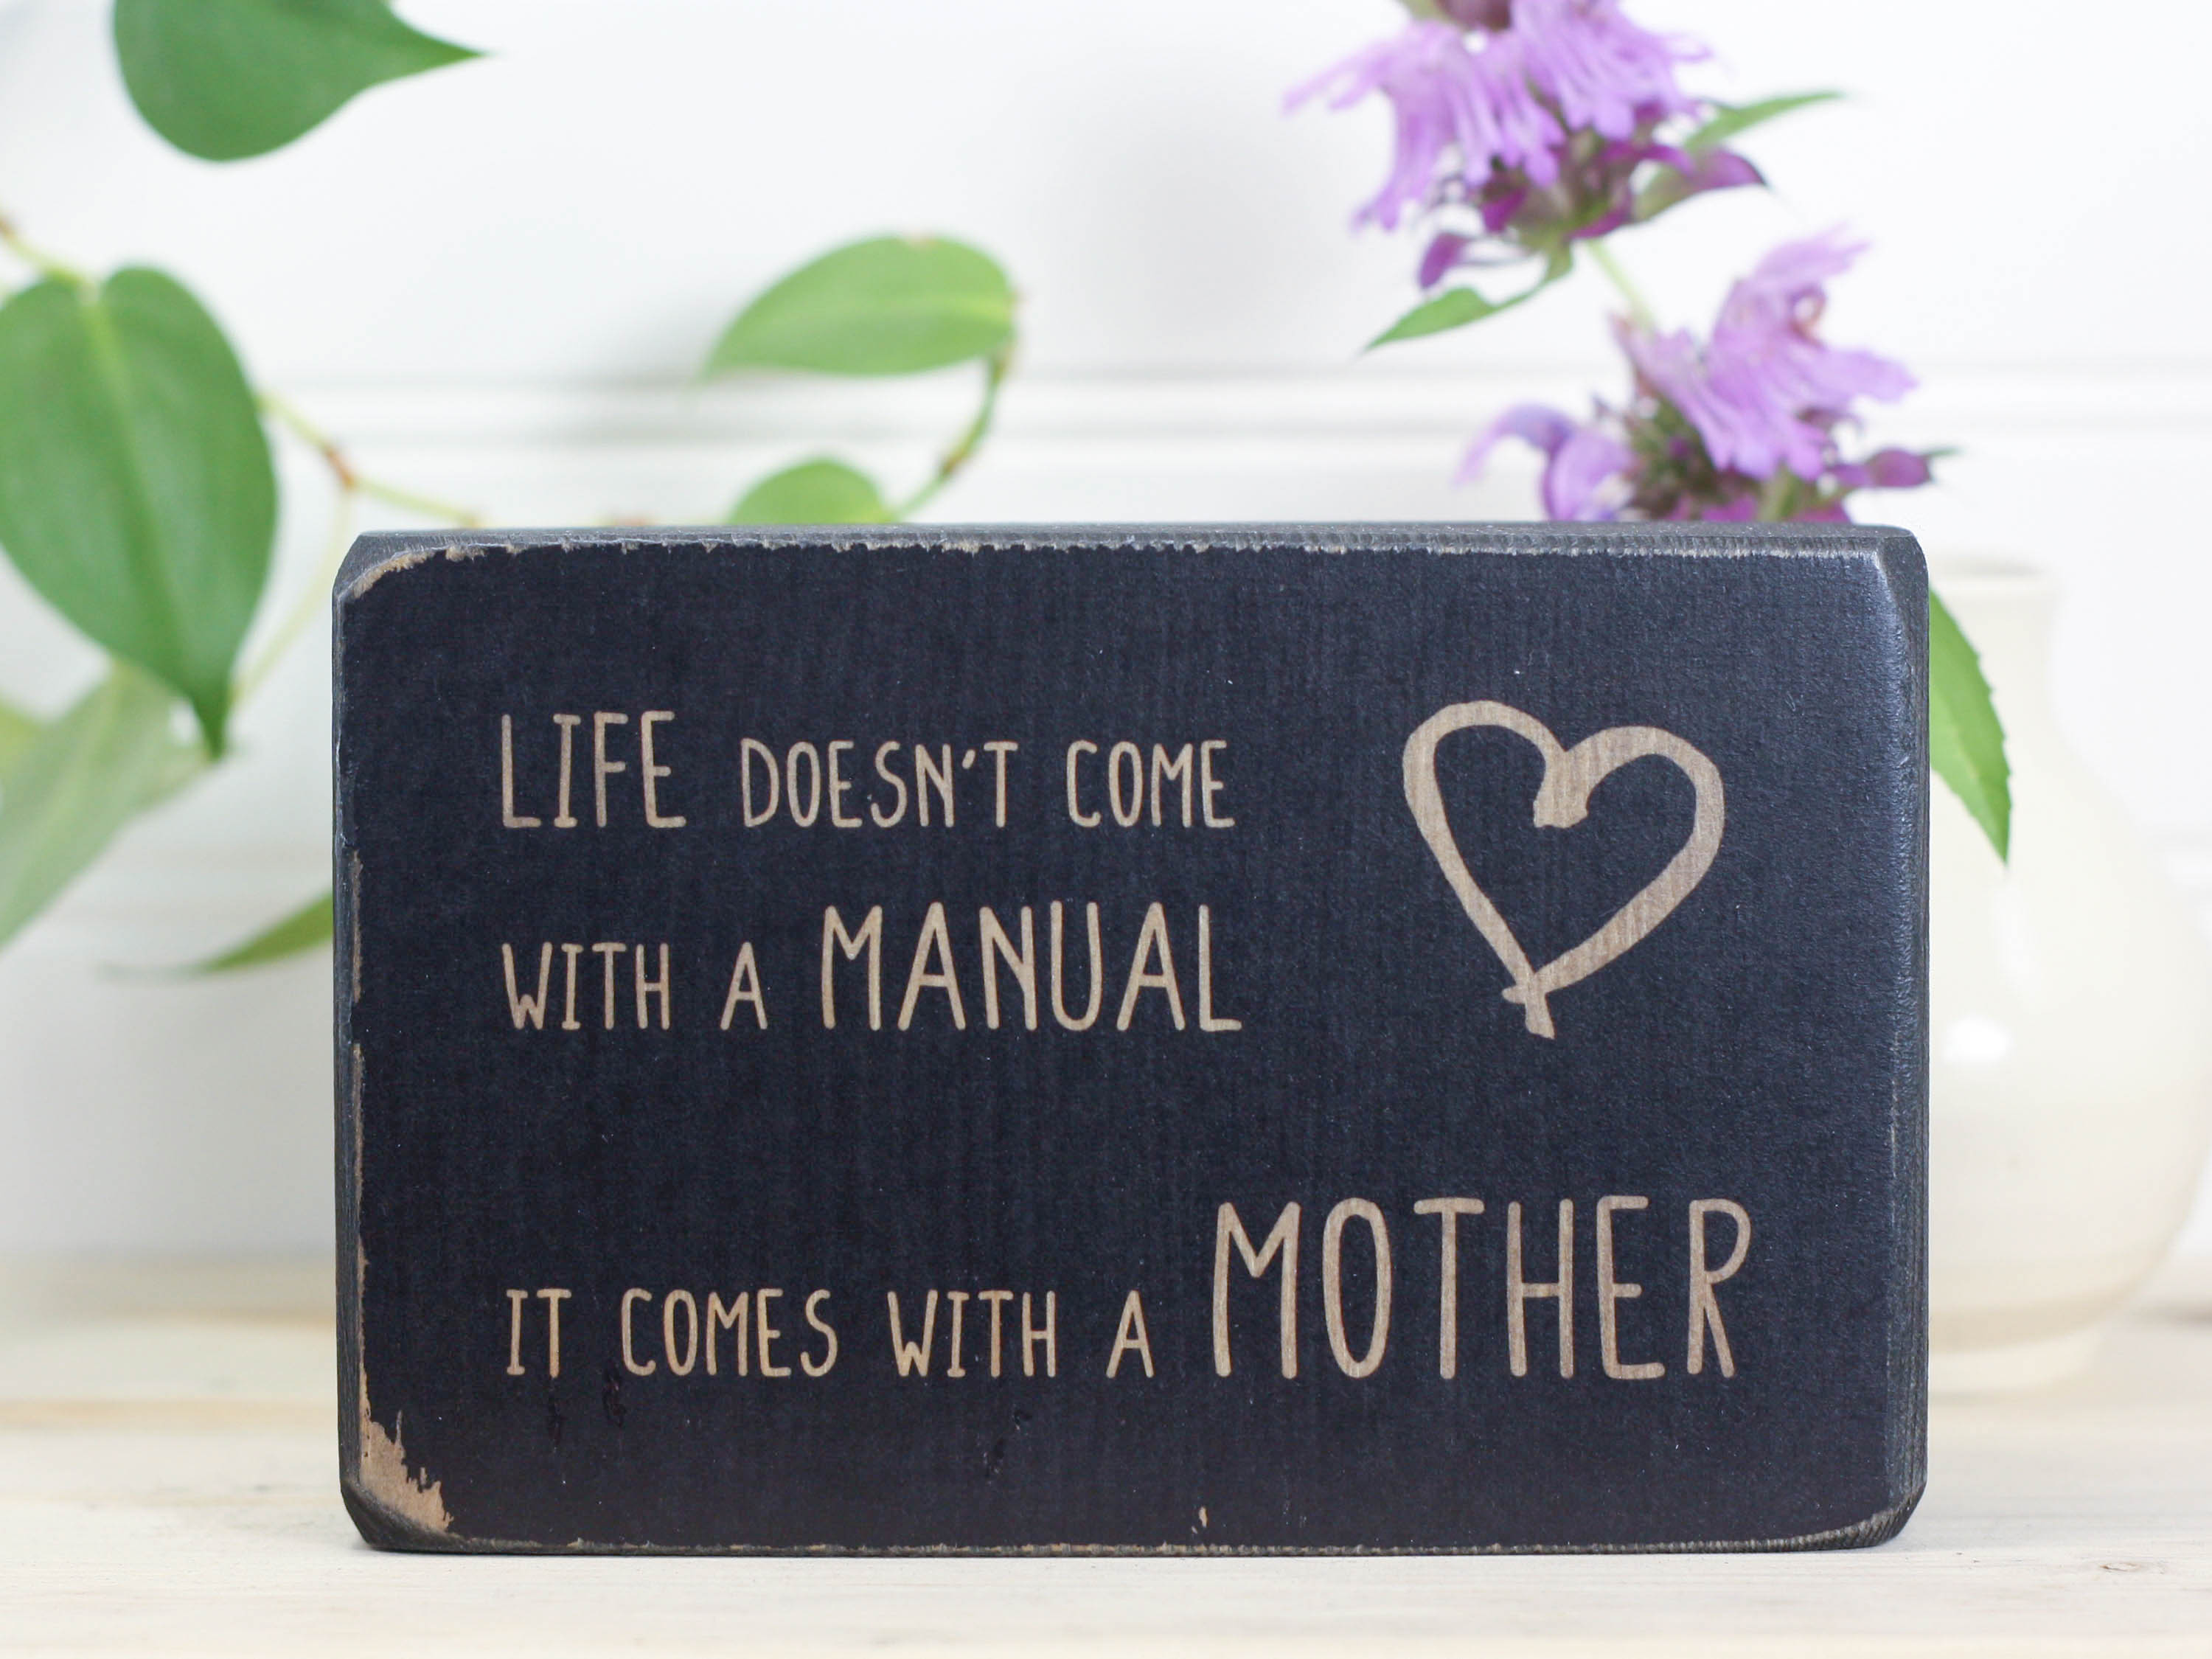 Small wood decor sign in distressed black with the saying "Life doesn't come with a manual. It comes with a mother."